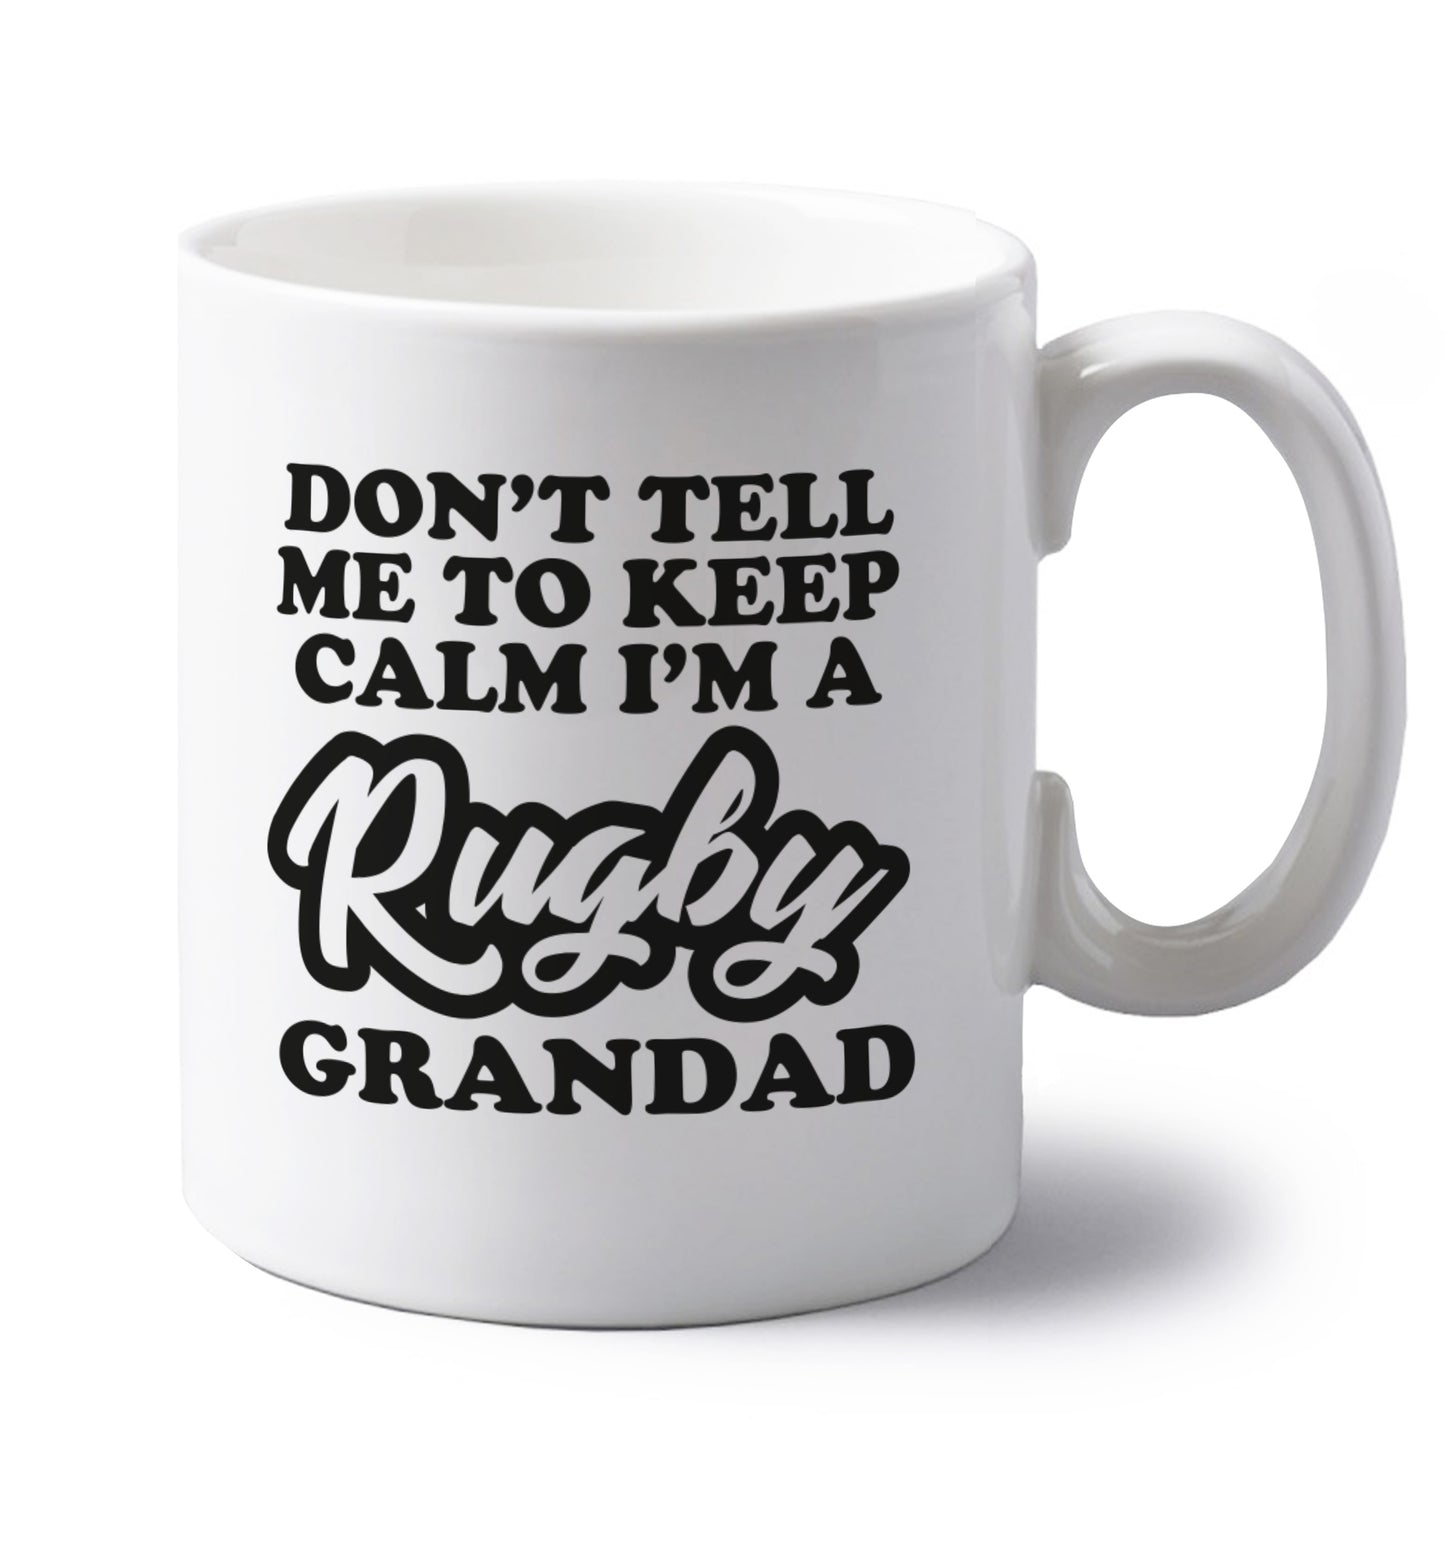 Don't tell me to keep calm I'm a rugby dad left handed white ceramic mug 